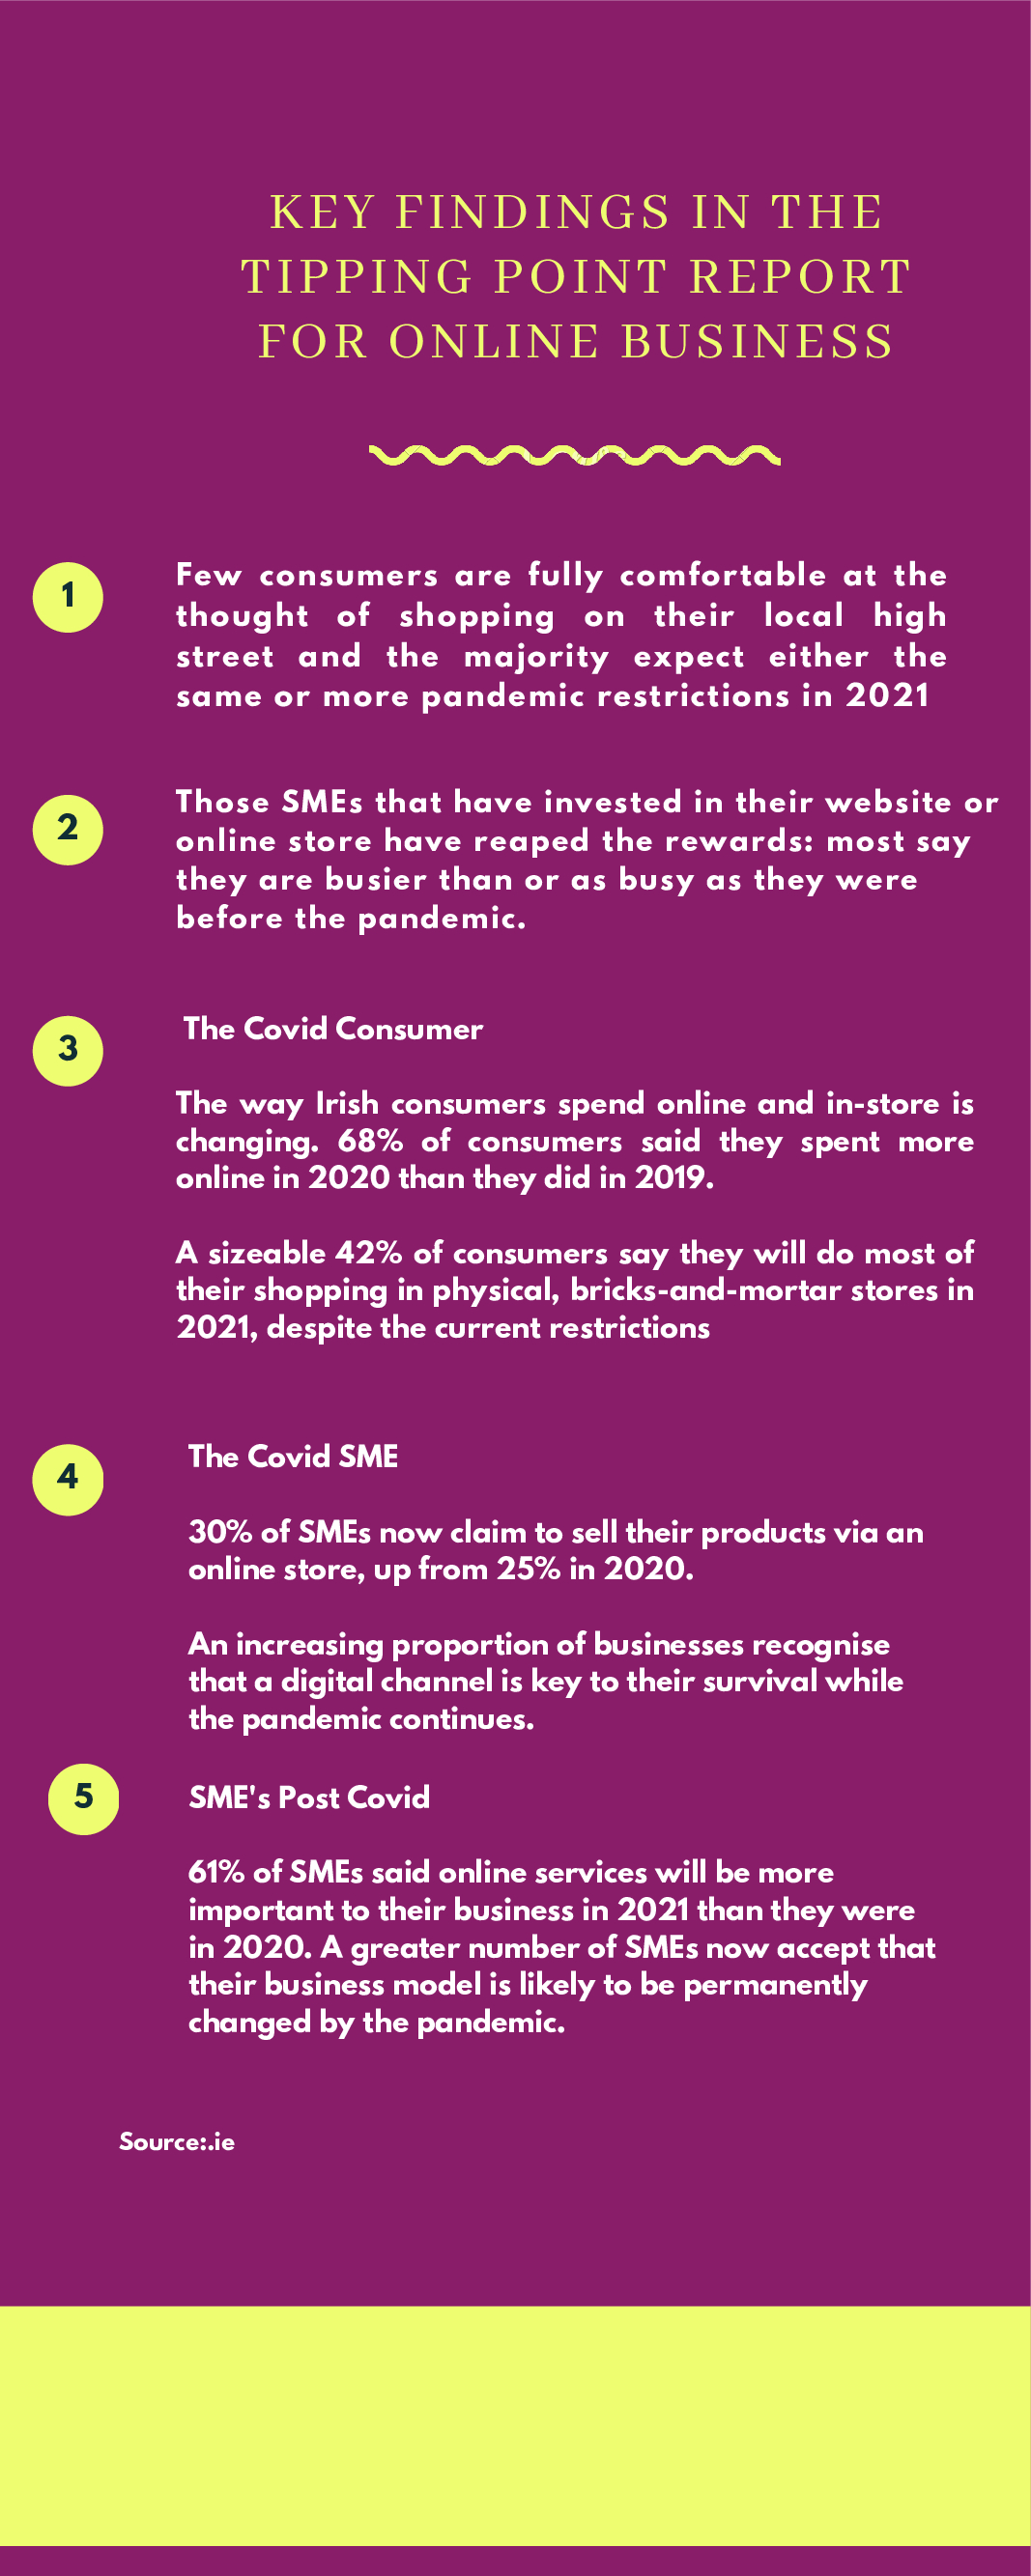 KEY FINDINGS IN THE TIPPING POINT REPORT FOR ONLINE BUSINESS 2 pdf